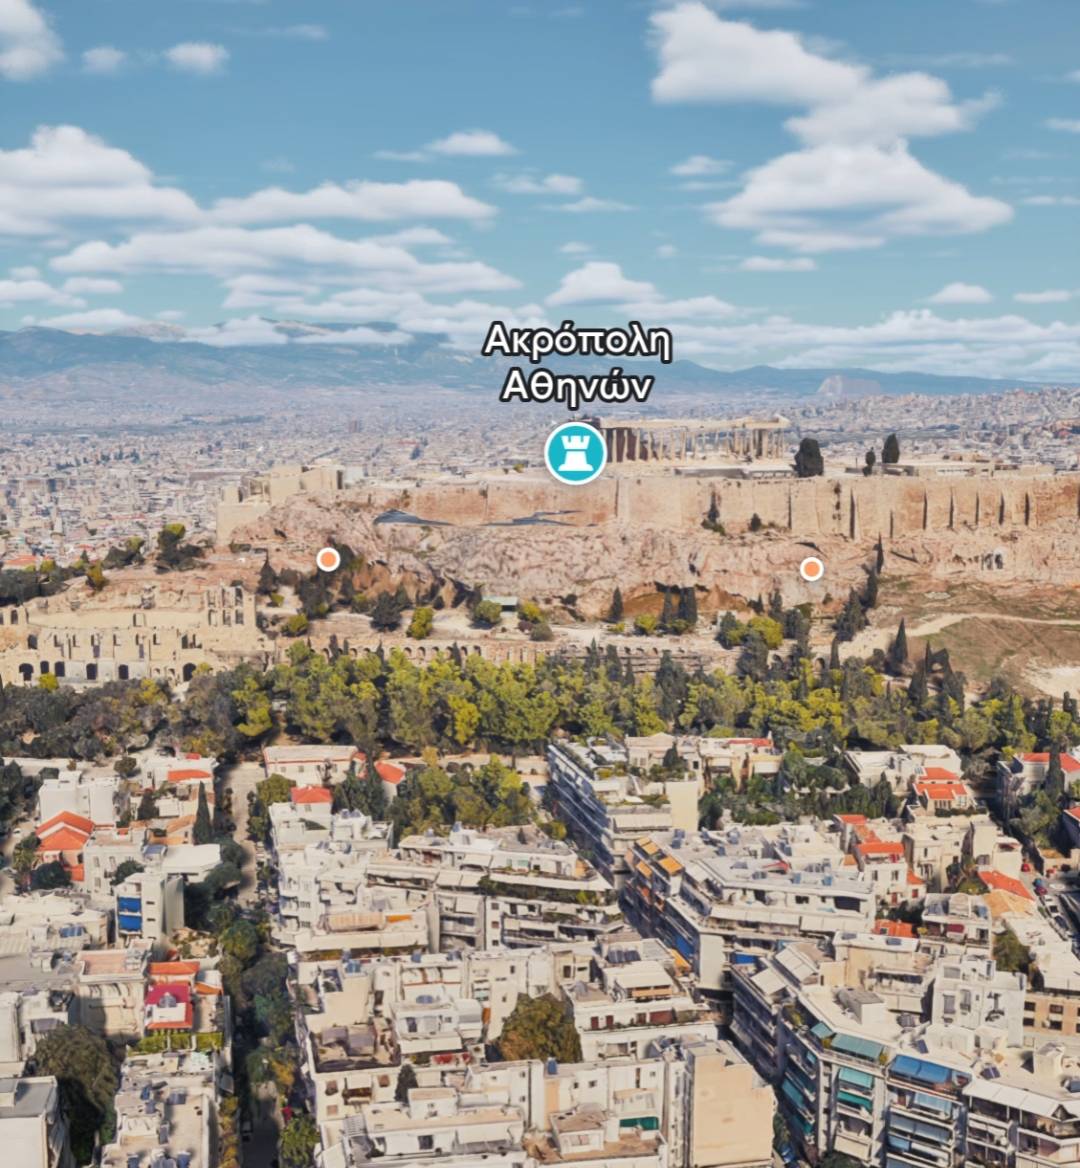 The immersive view has arrived in Greece and it is stunning